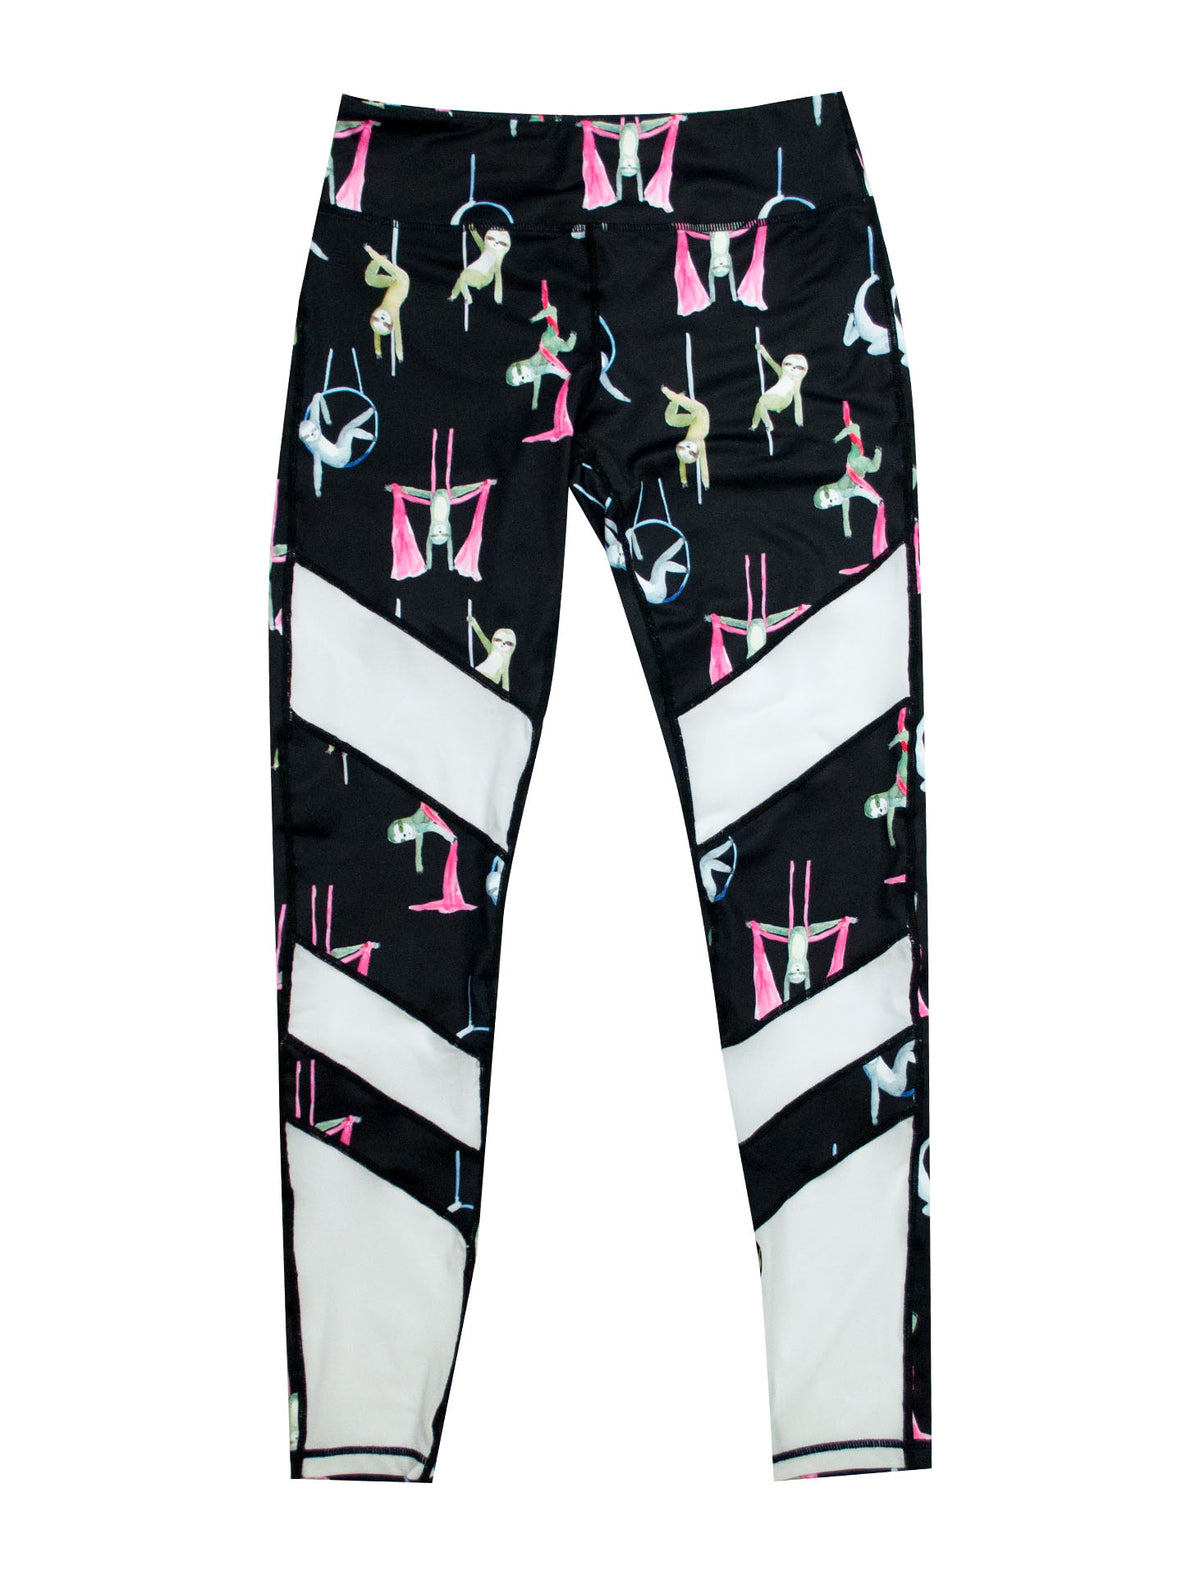 Buy Victoria's Secret PINK Ultimate V High Waist Legging with Mesh from  Next Norway